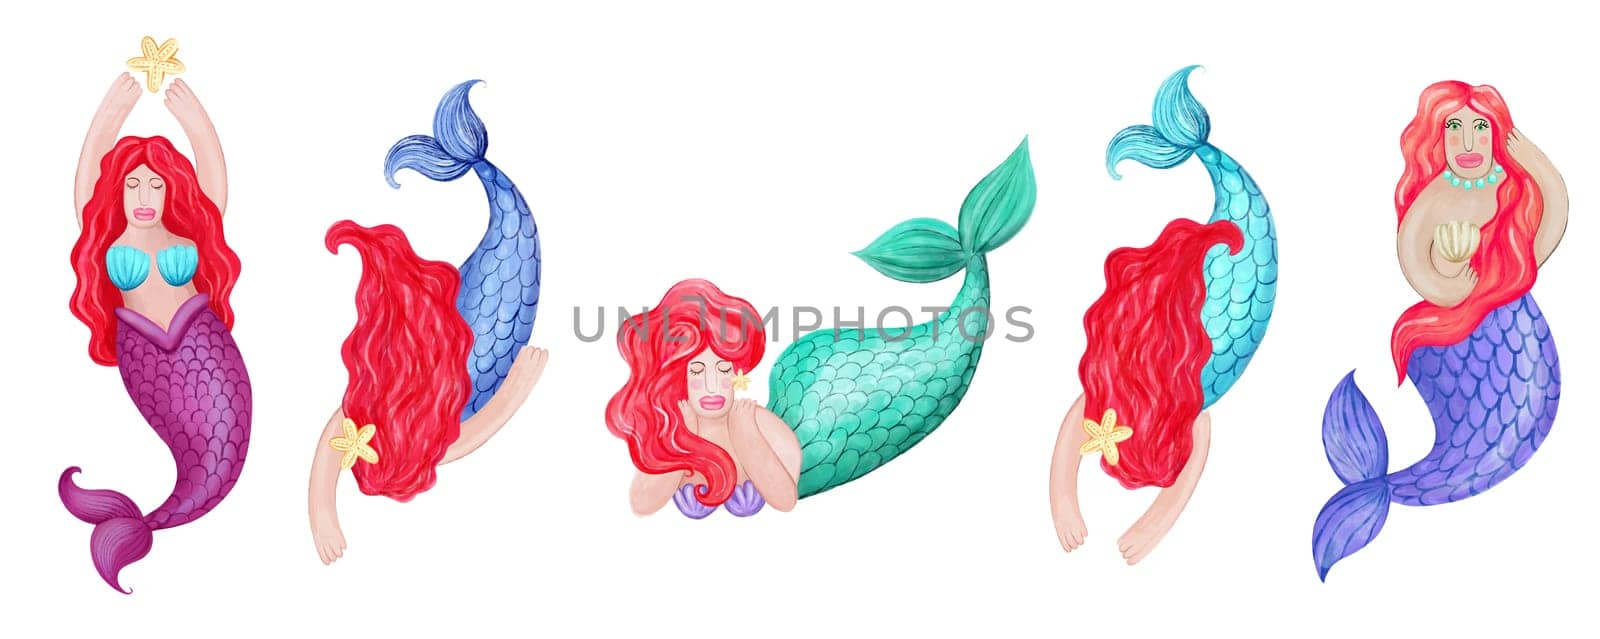 Collection of illustrations of various multicolored cartoon mermaids with fish tail isolated on white background